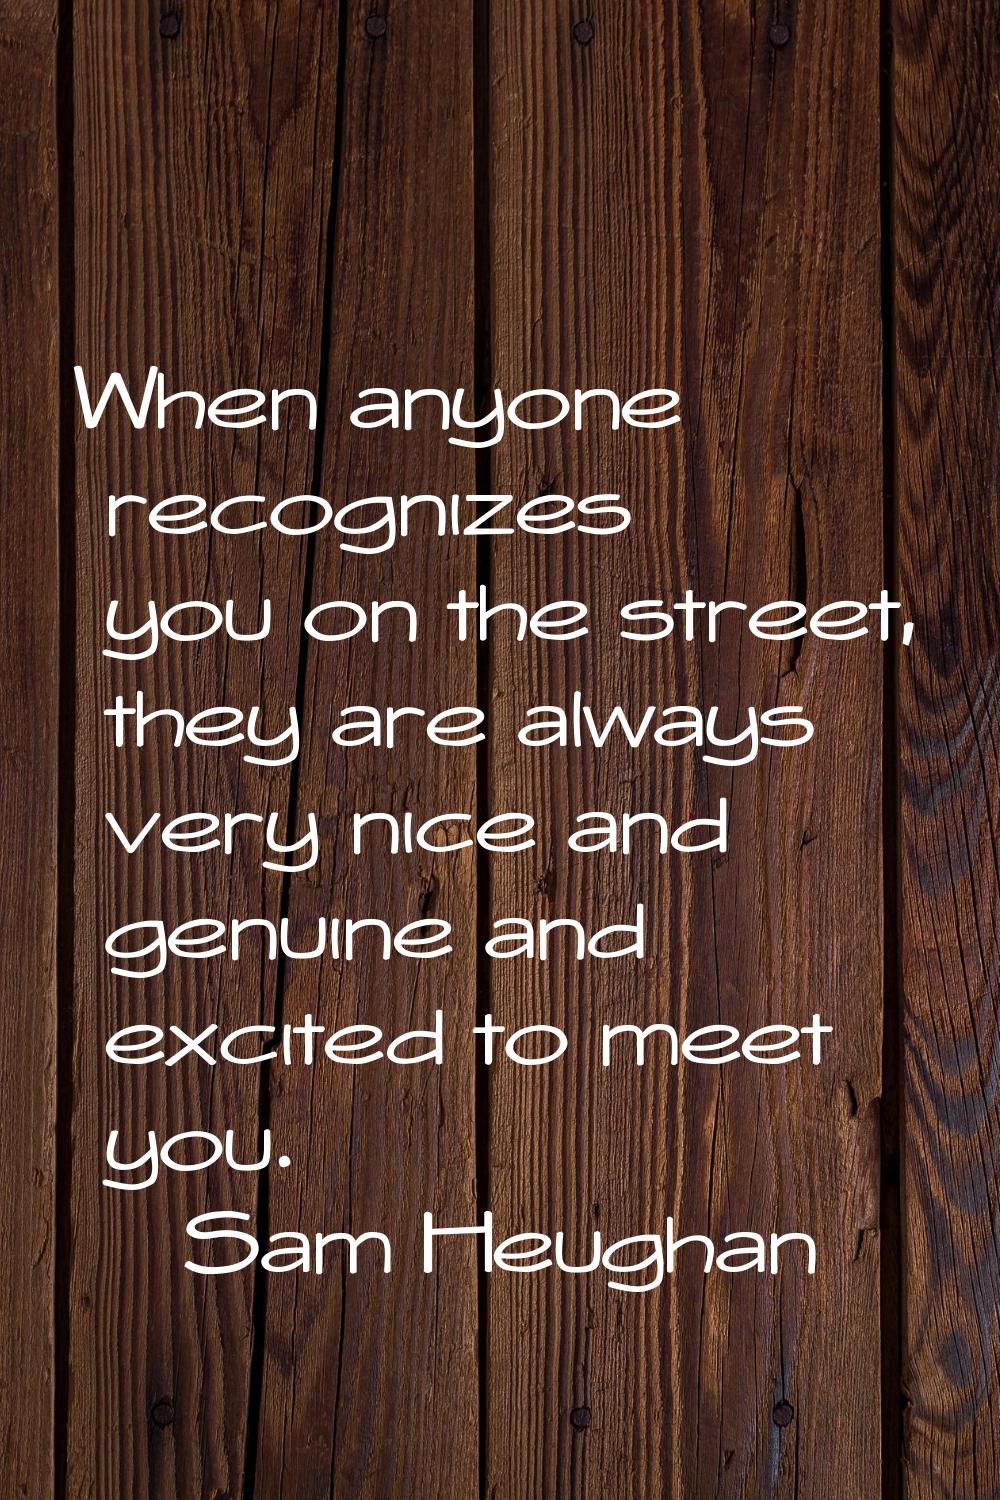 When anyone recognizes you on the street, they are always very nice and genuine and excited to meet